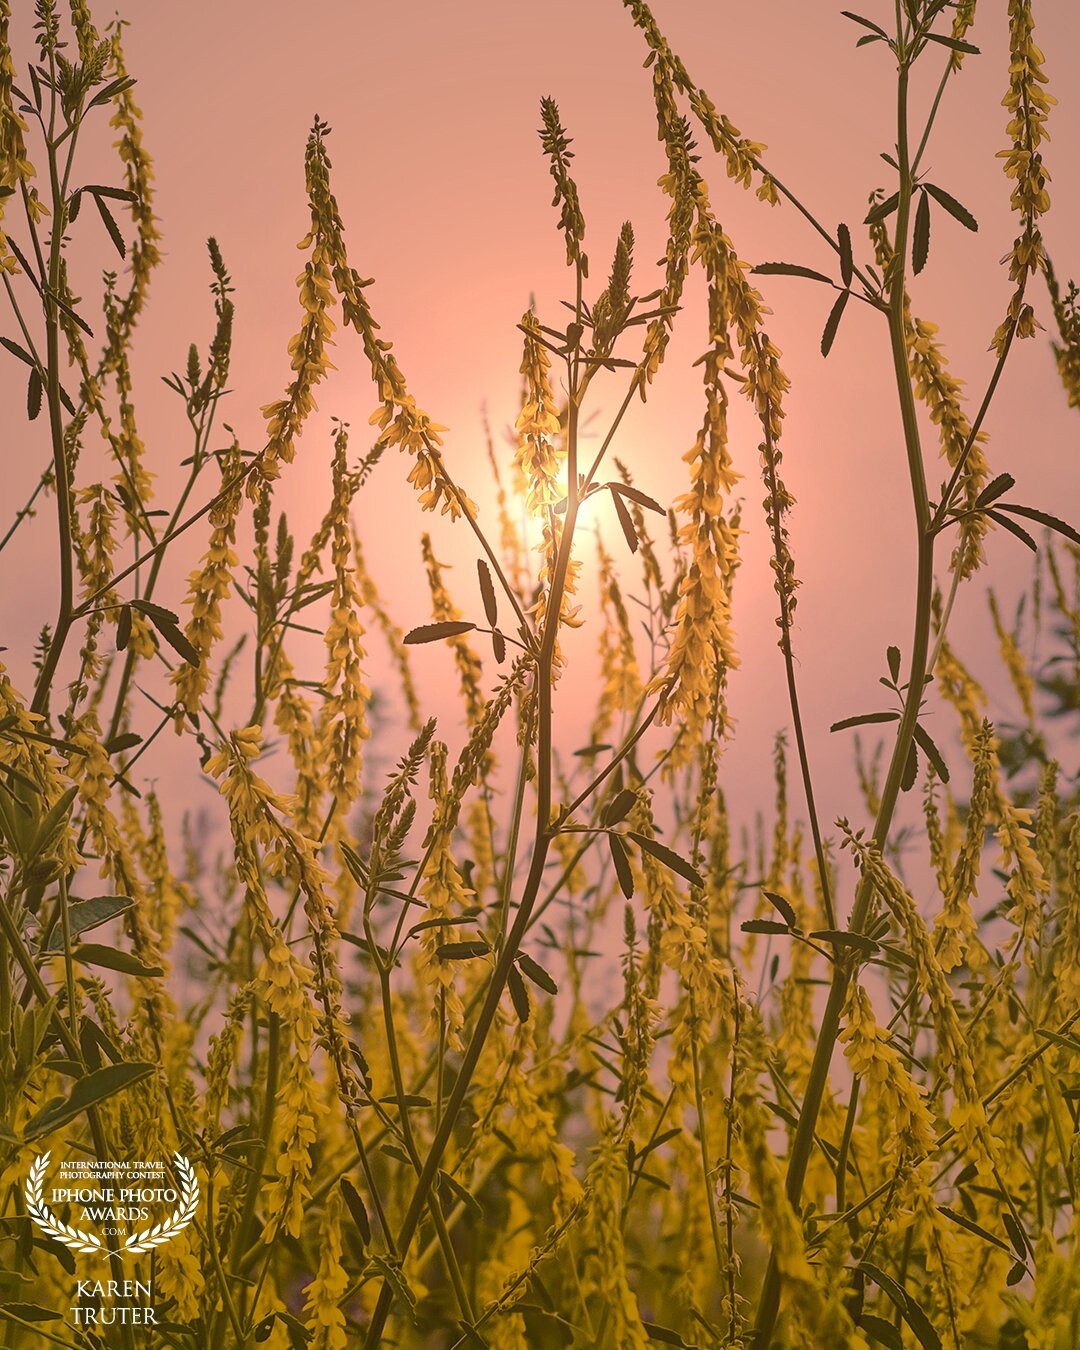 On my early morning walk, I loved how the whispy yellow wild flowers reached above the rest towards the sun, I crouched down and took this at a low angle…